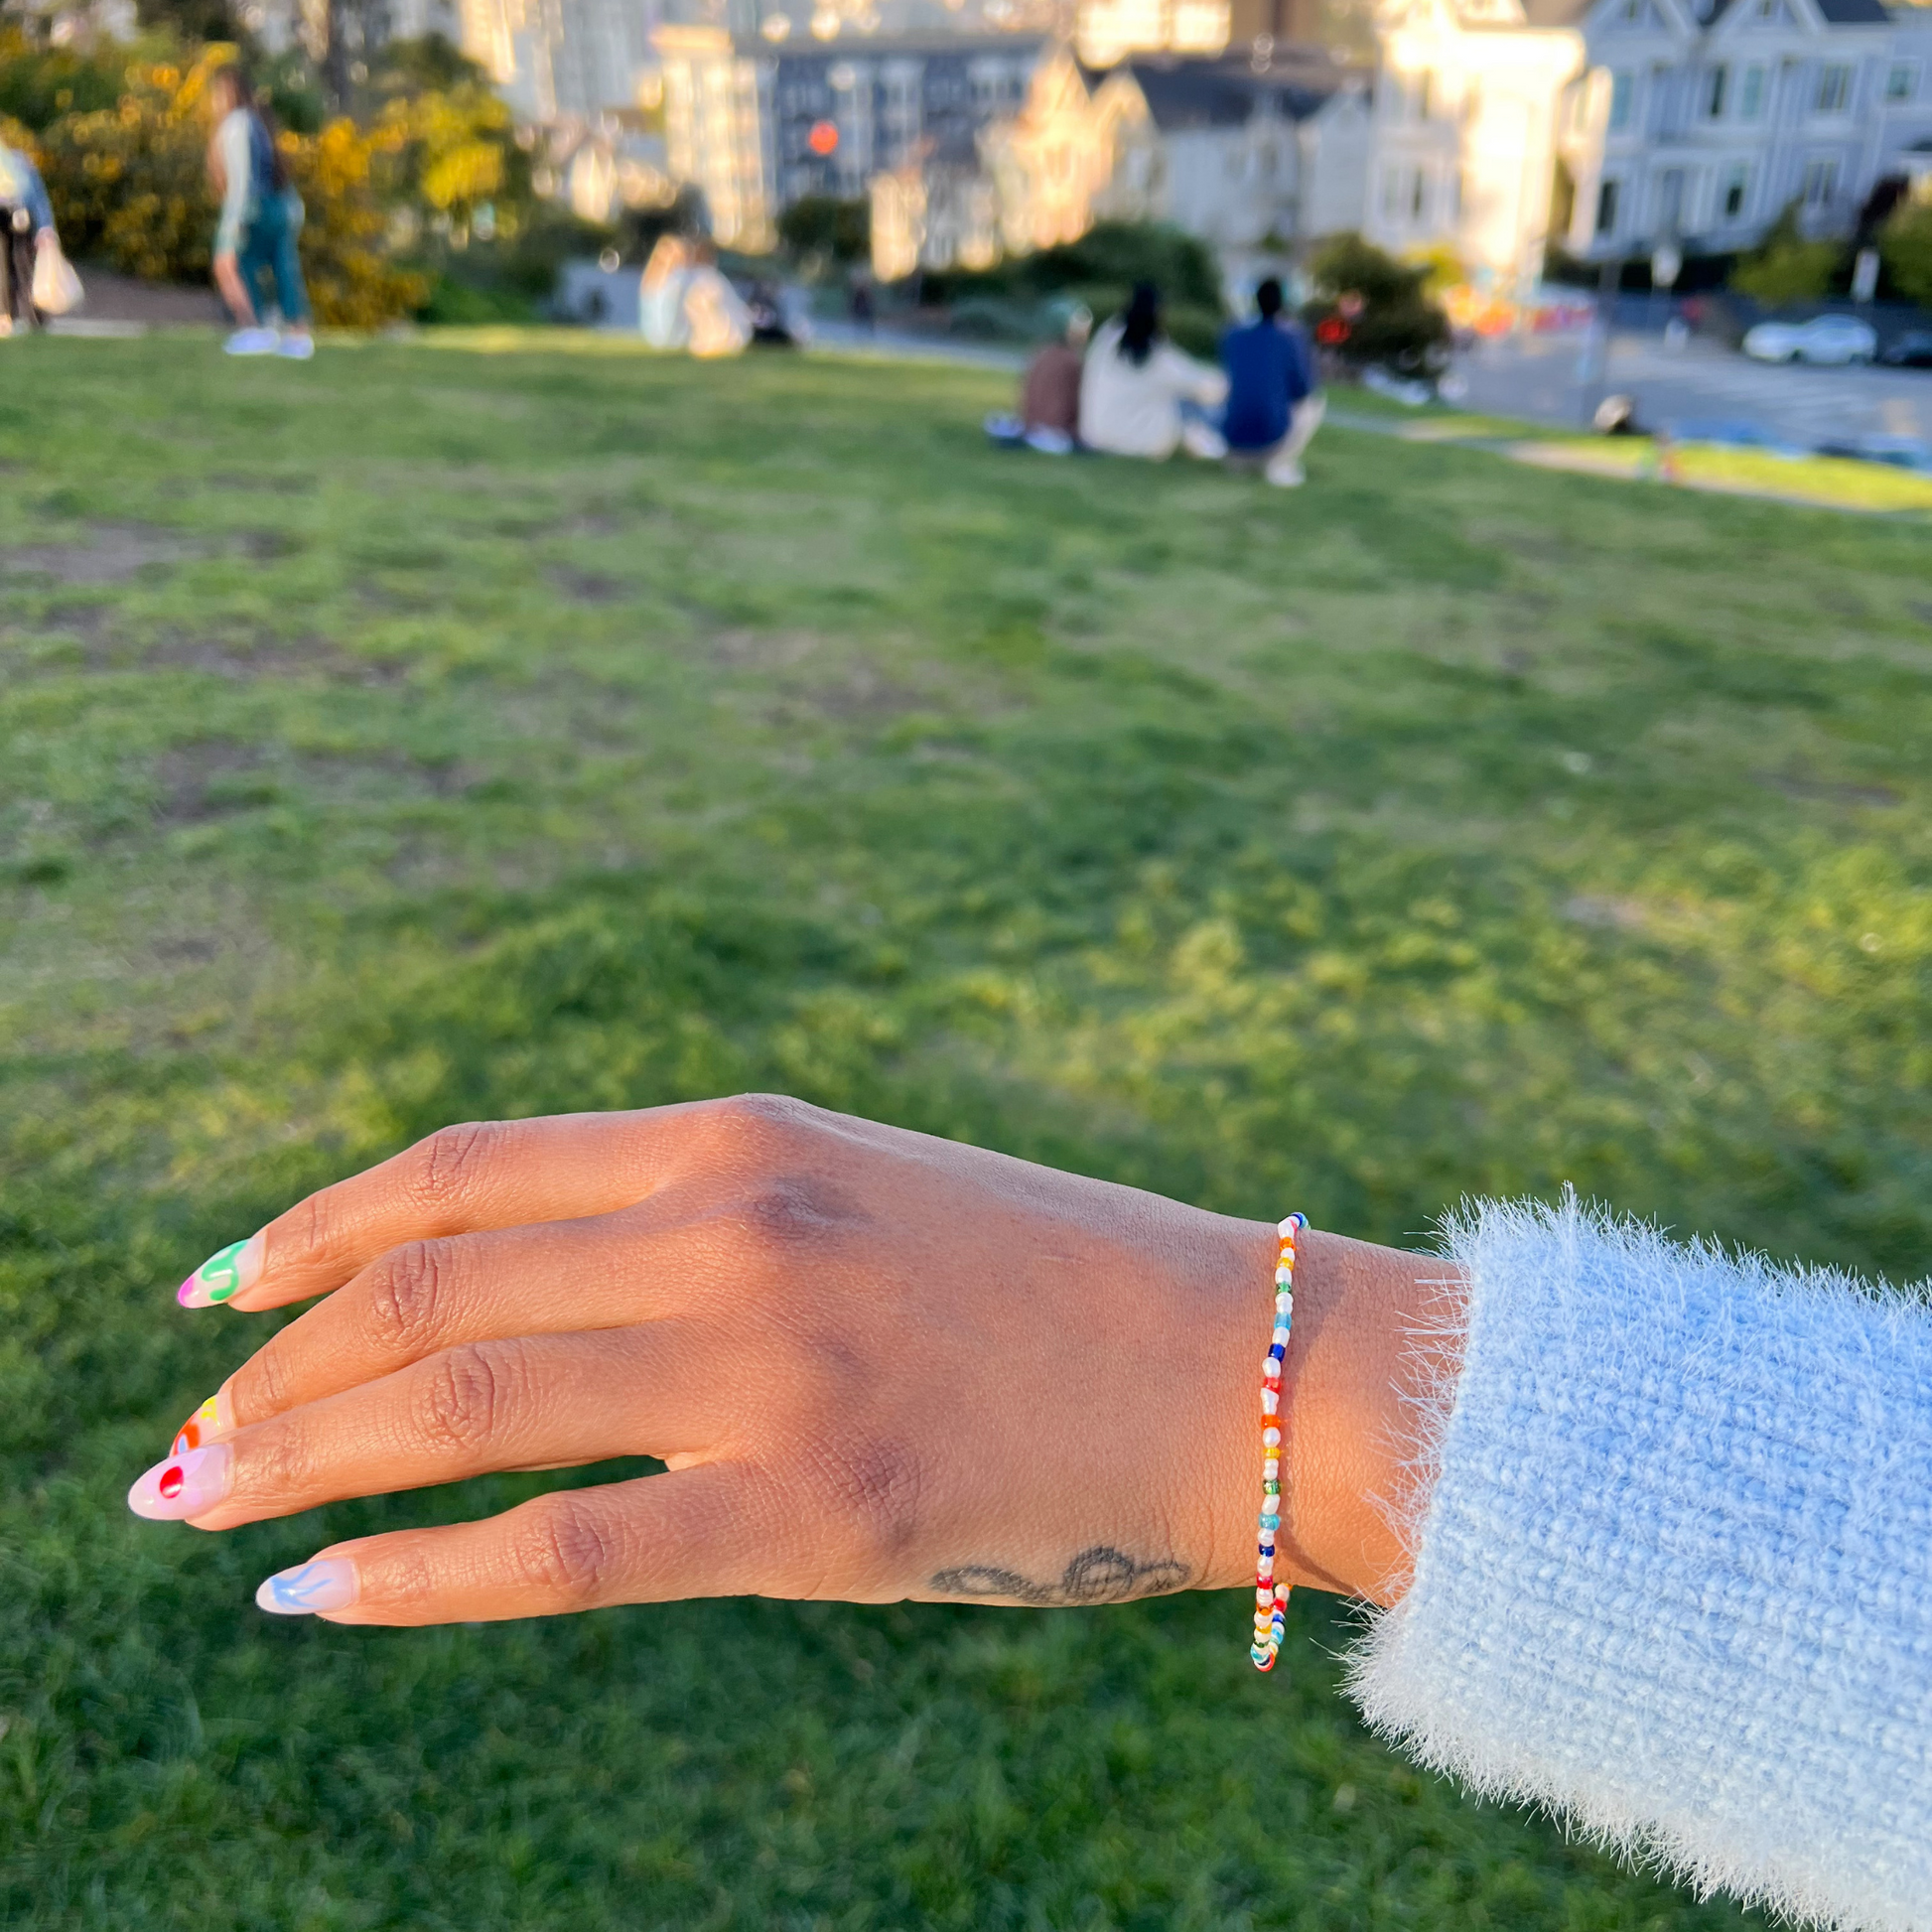 Roop jewelry rainbow baby pearl bracelet. Spring 2022 aesthetic jewelry. Summer 2022 aesthetic jewelry. Rainbow pearl jewelry. Colorful pretty jewelry. Jewelry styled on Danielle Meulens. Painted ladies in Alamo Square Park.